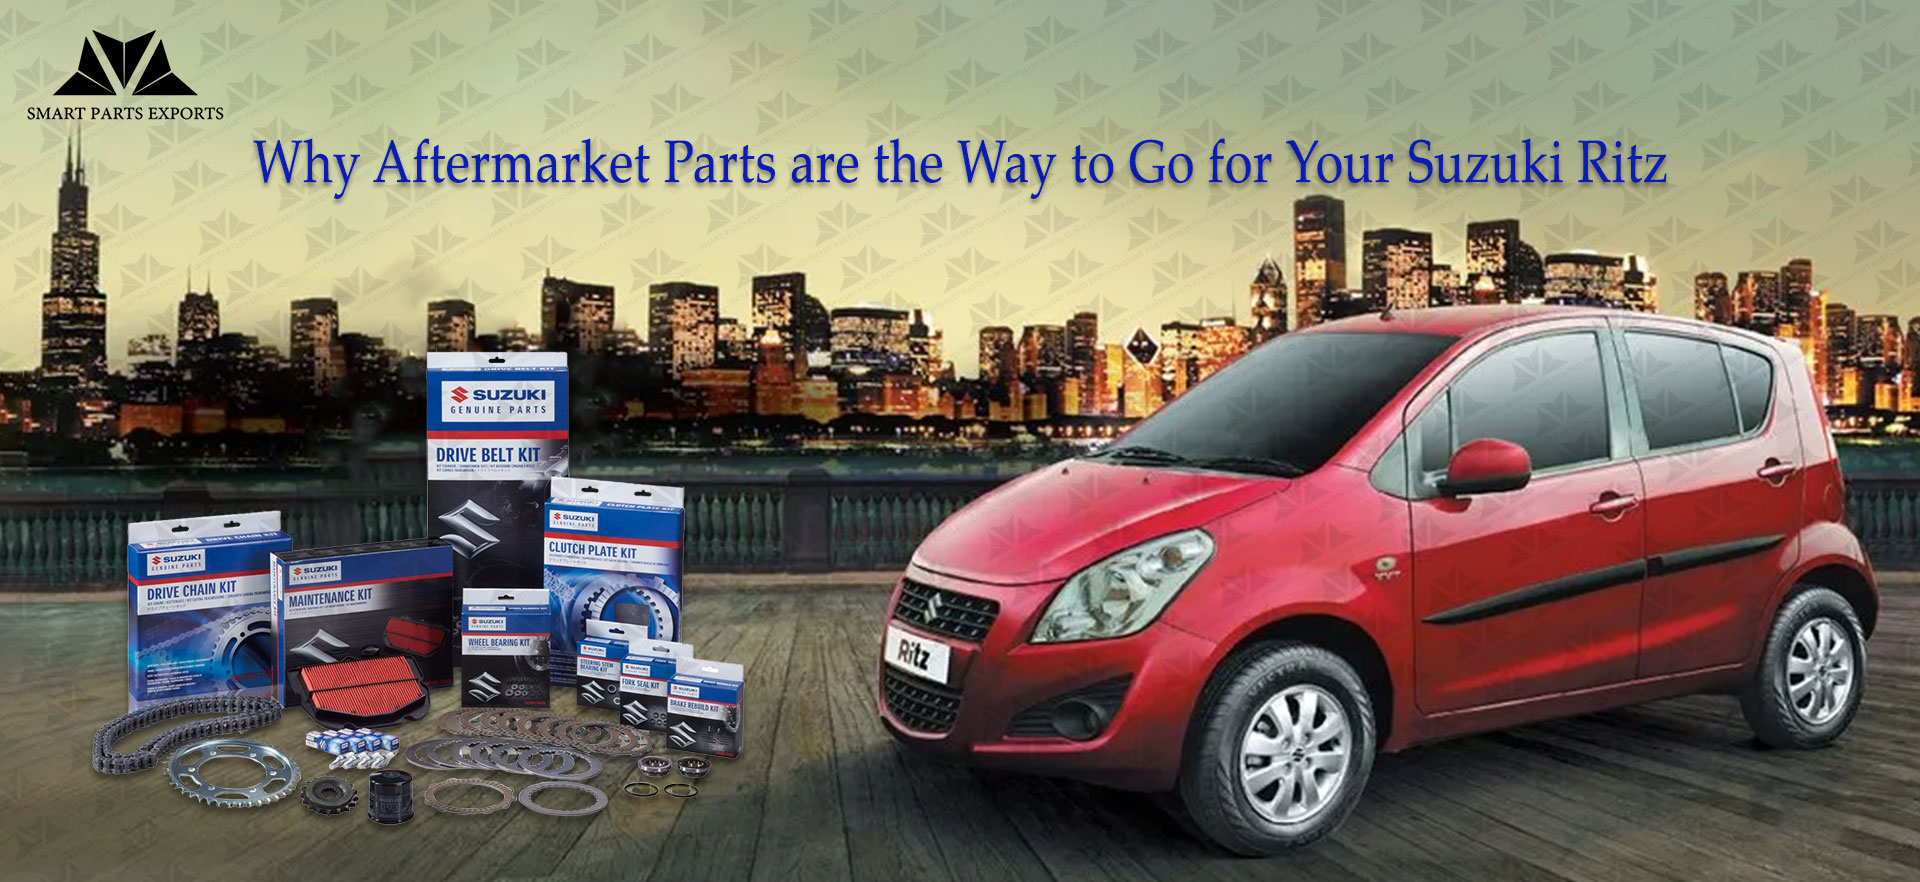 Why Aftermarket parts are the way to go for your Suzuki Ritz